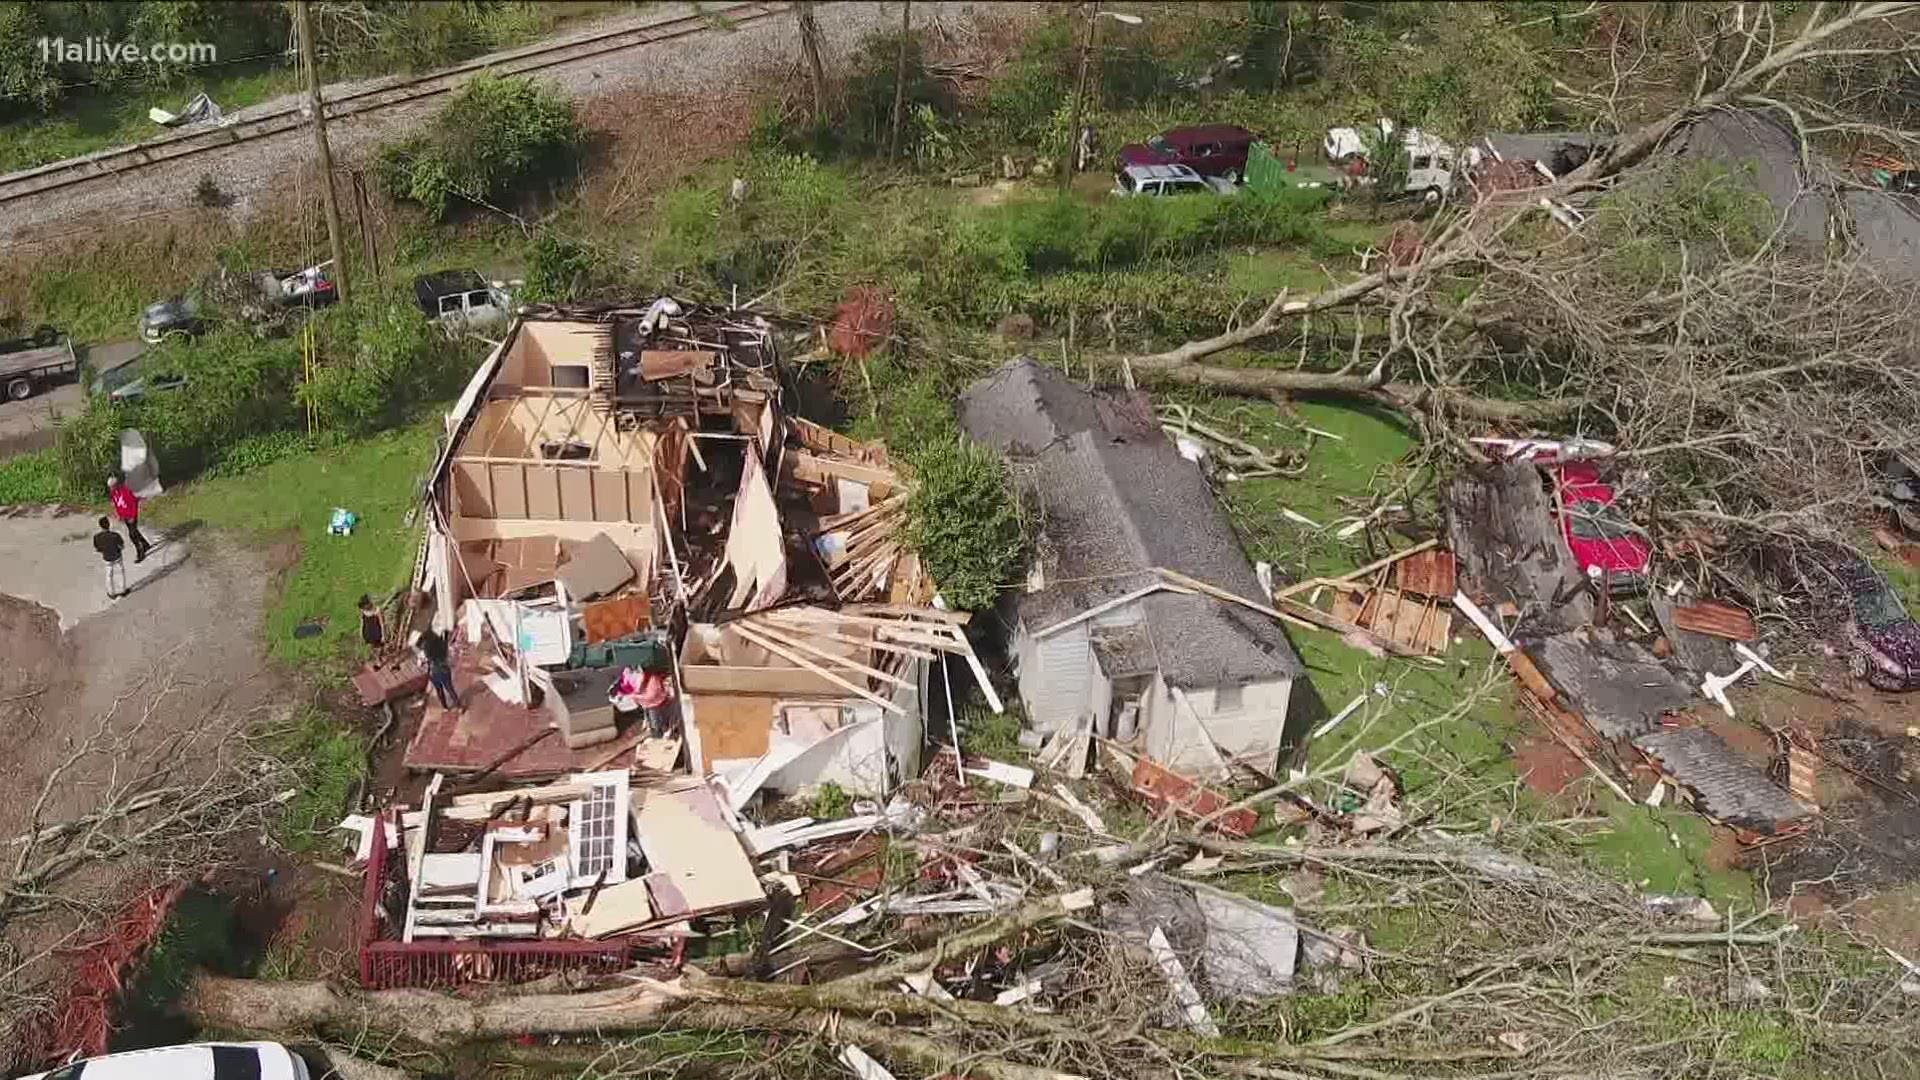 One survivor described how the tornado blew through his front door and sent his family running for cover.